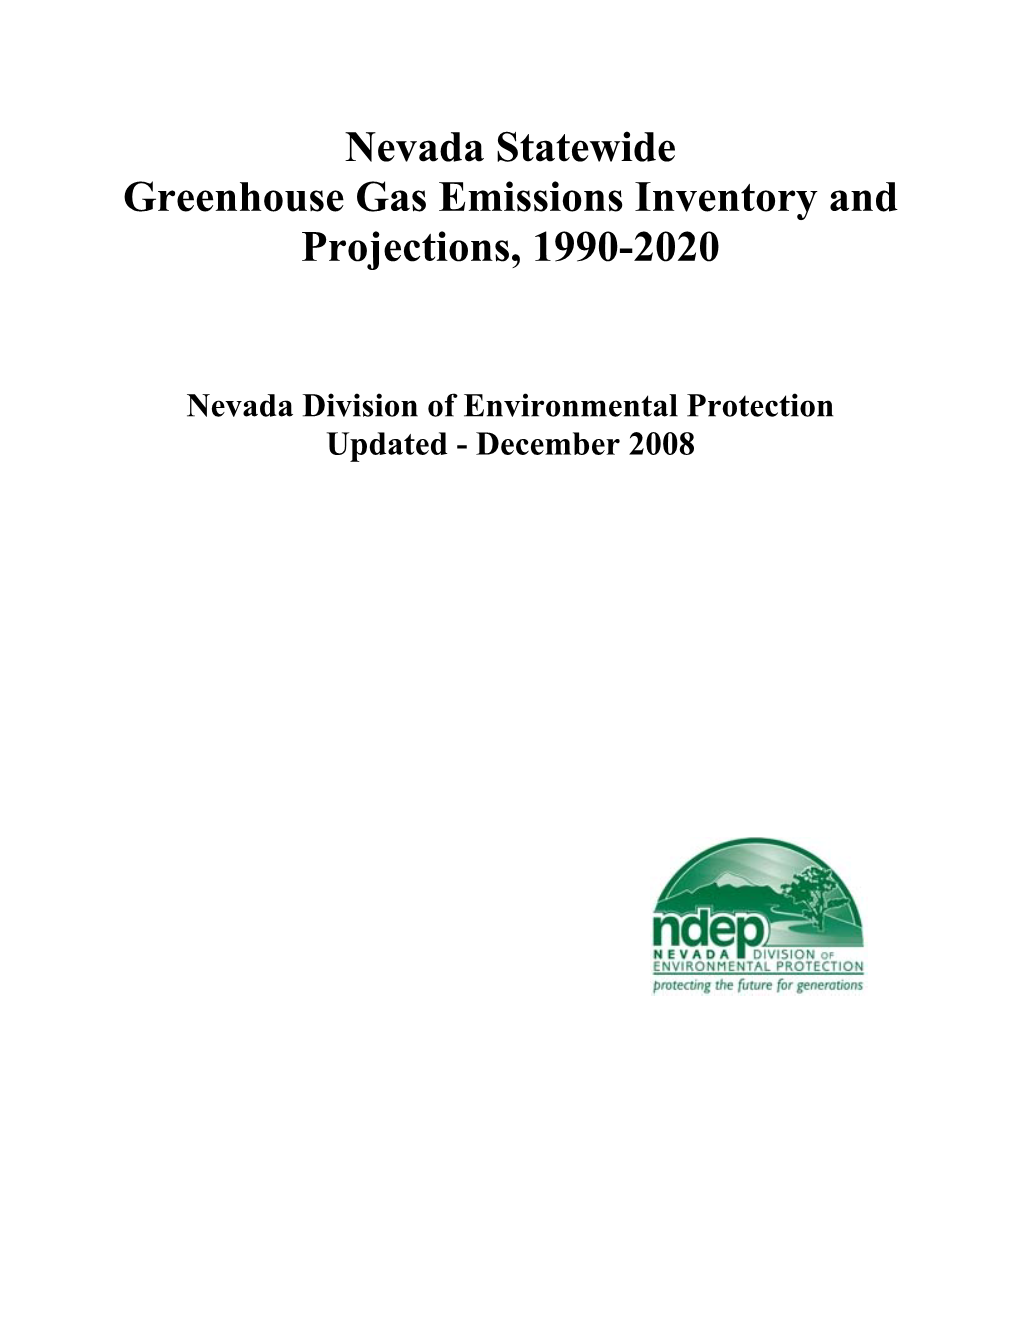 Nevada Statewide Greenhouse Gas Emissions Inventory and Projections, 1990-2020